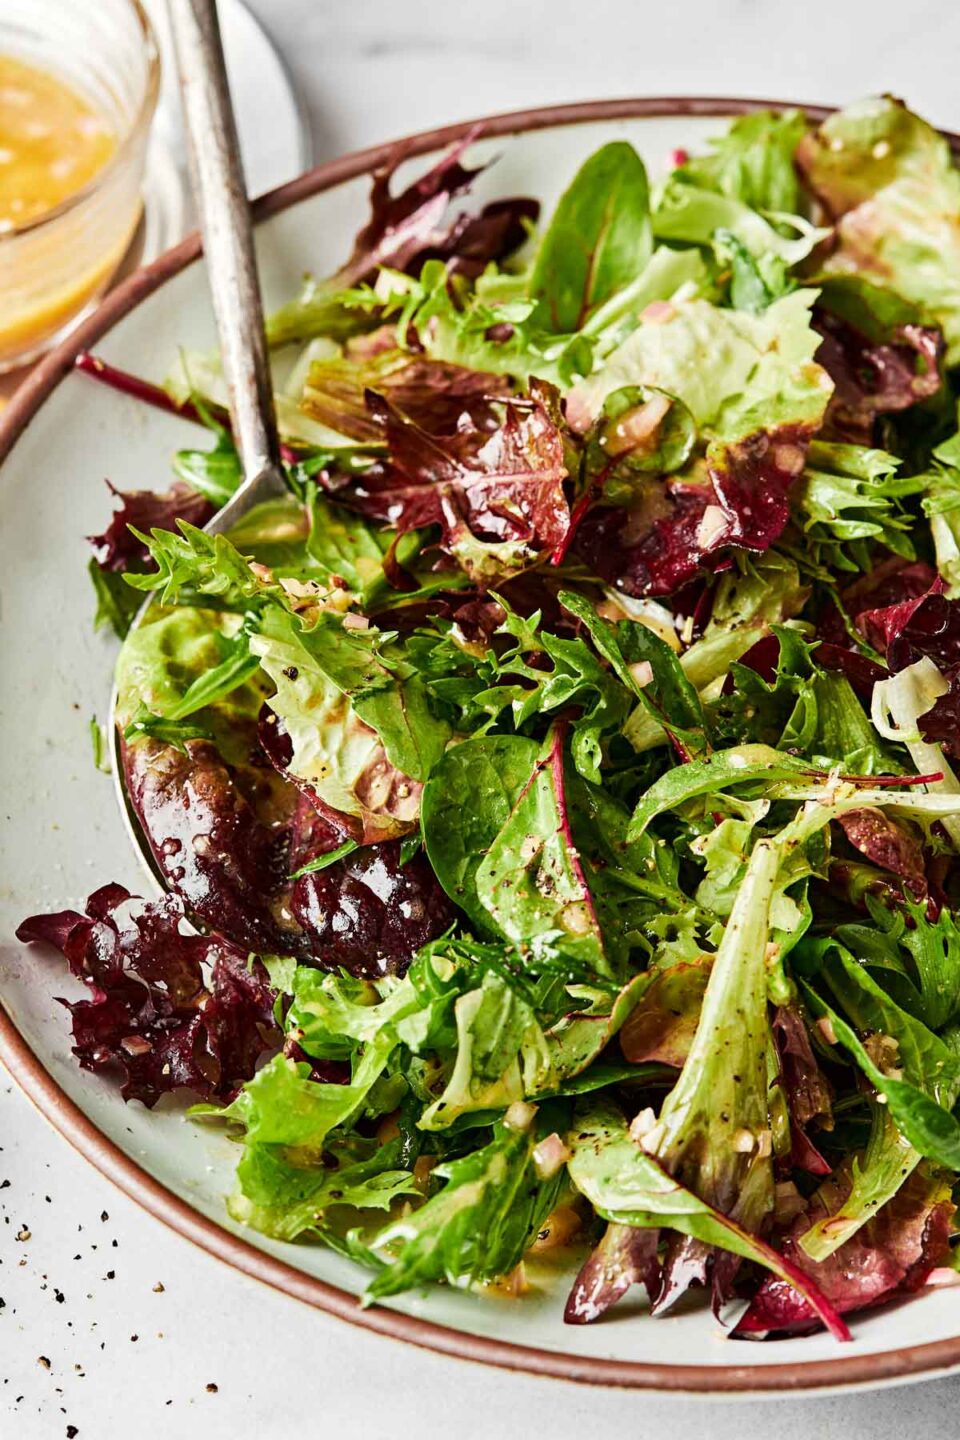 A close up shot of dressed mixed greens in a shallow bowl on a white surface.